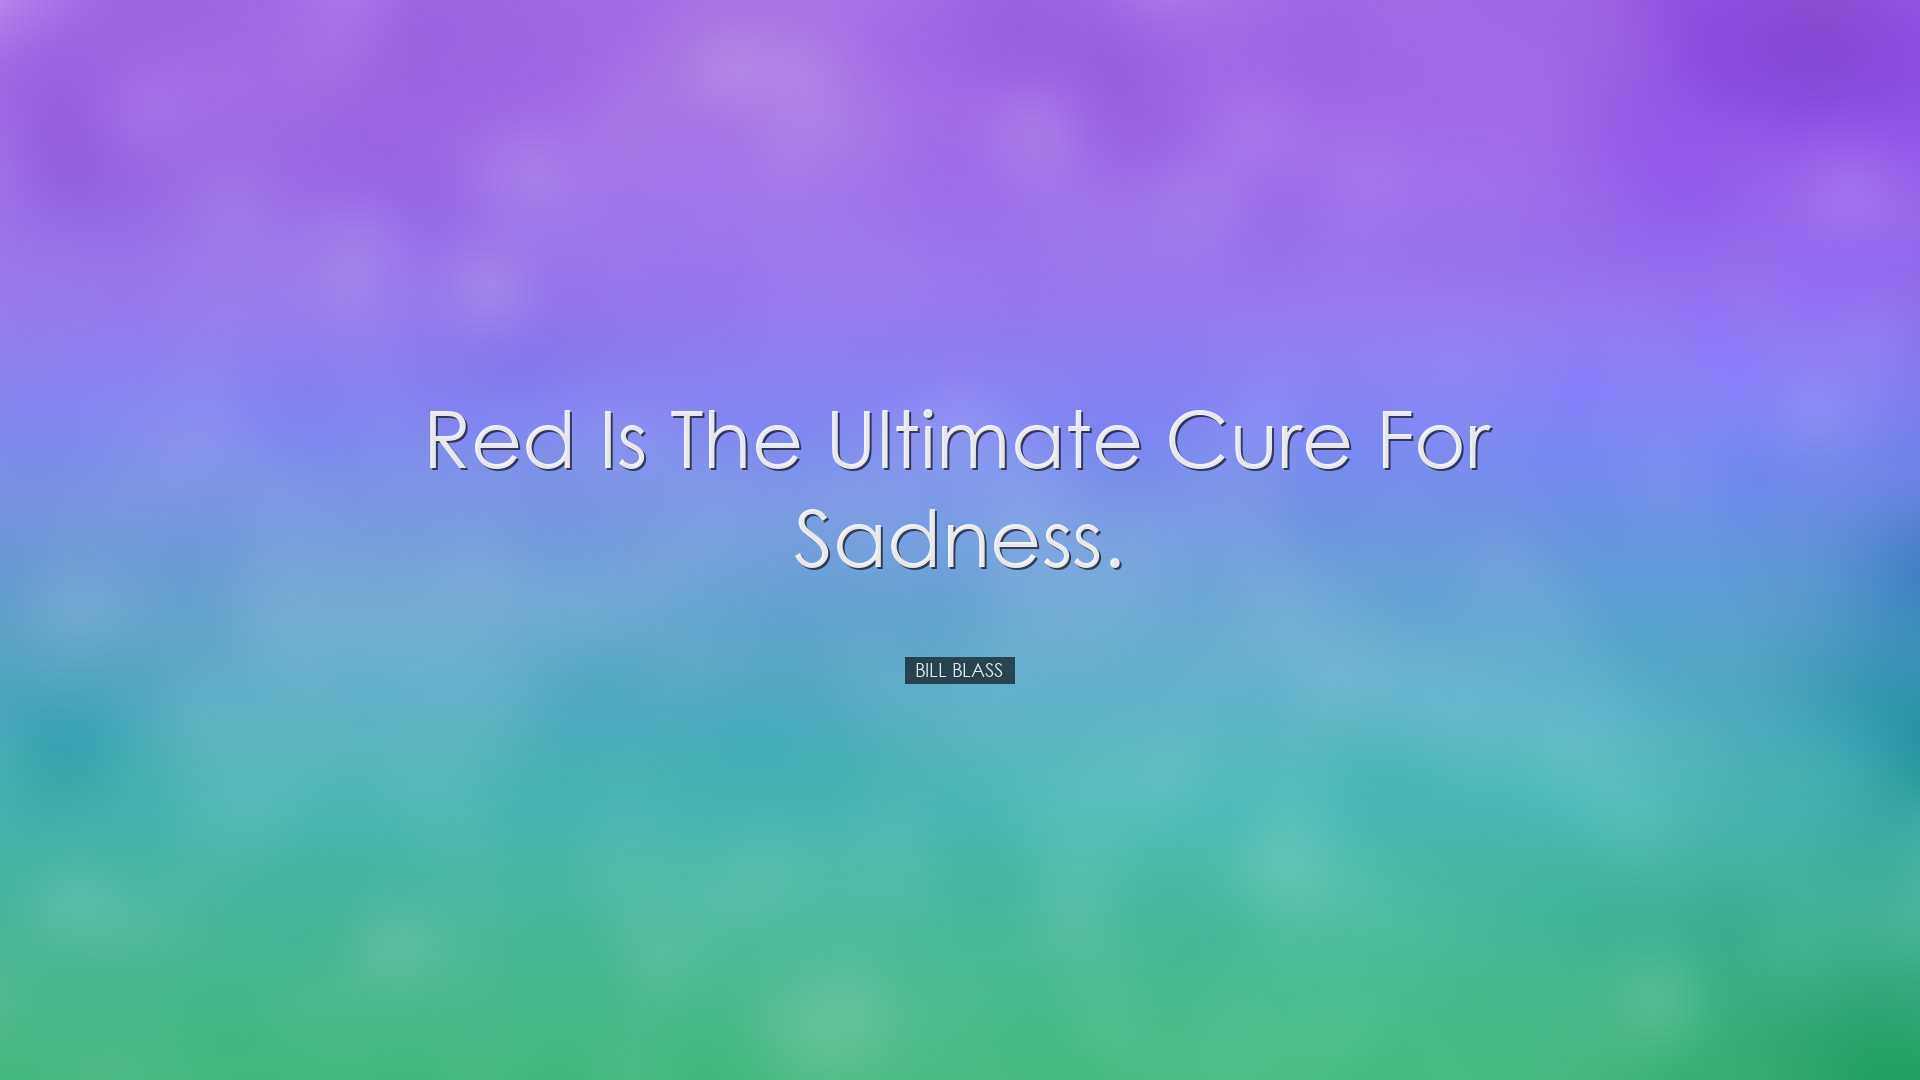 Red is the ultimate cure for sadness. - Bill Blass